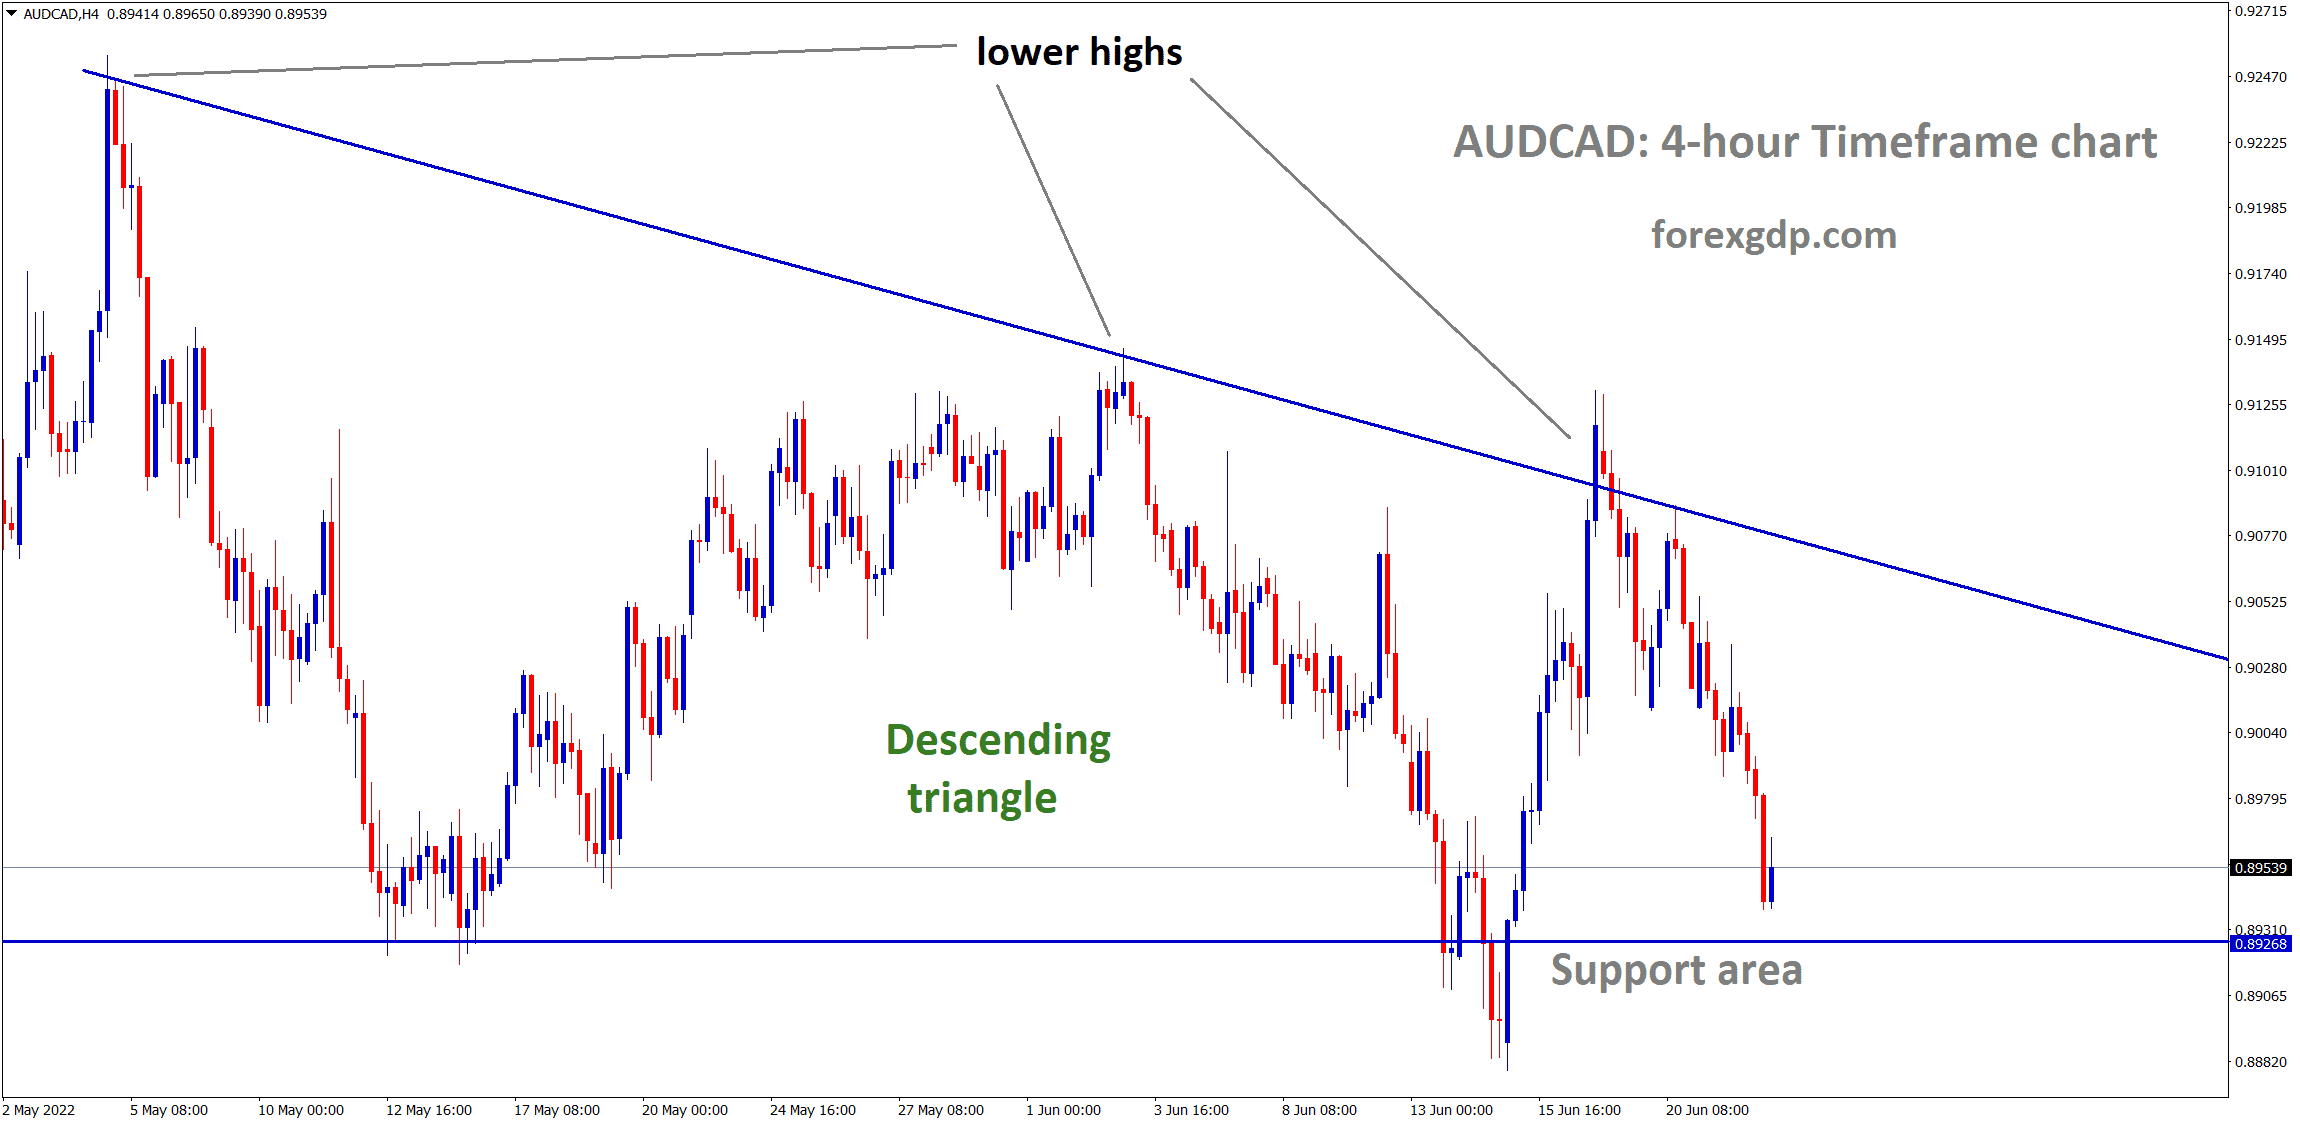 AUDCAD is moving in a descending triangle pattern and the market has reached the support area of the pattern.